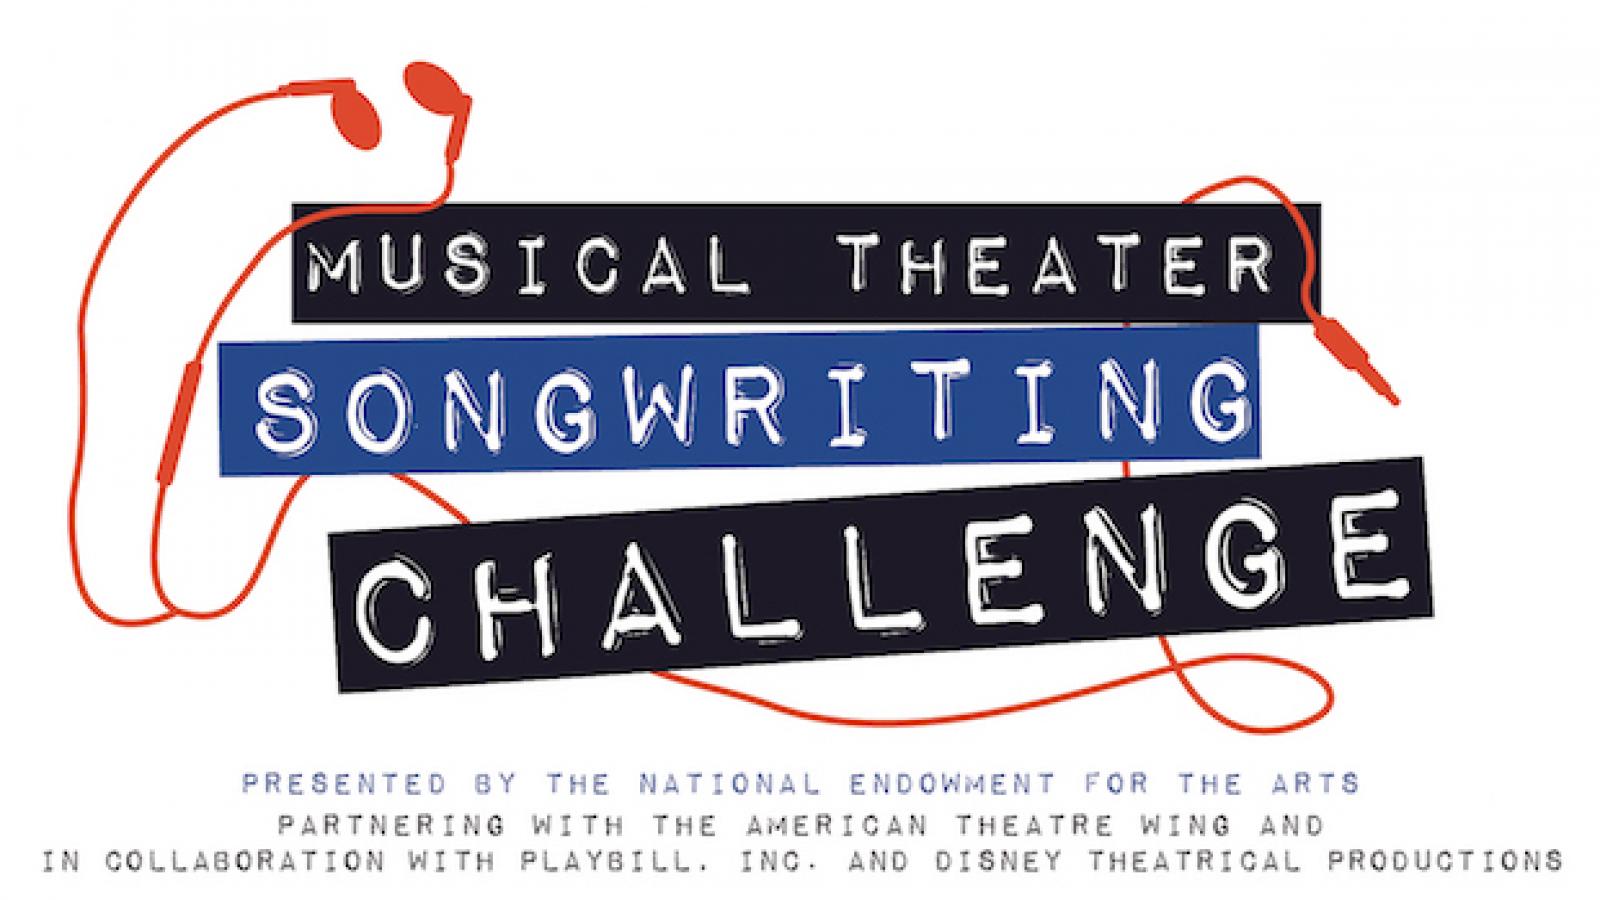 musican theater songwriting challenge logo 